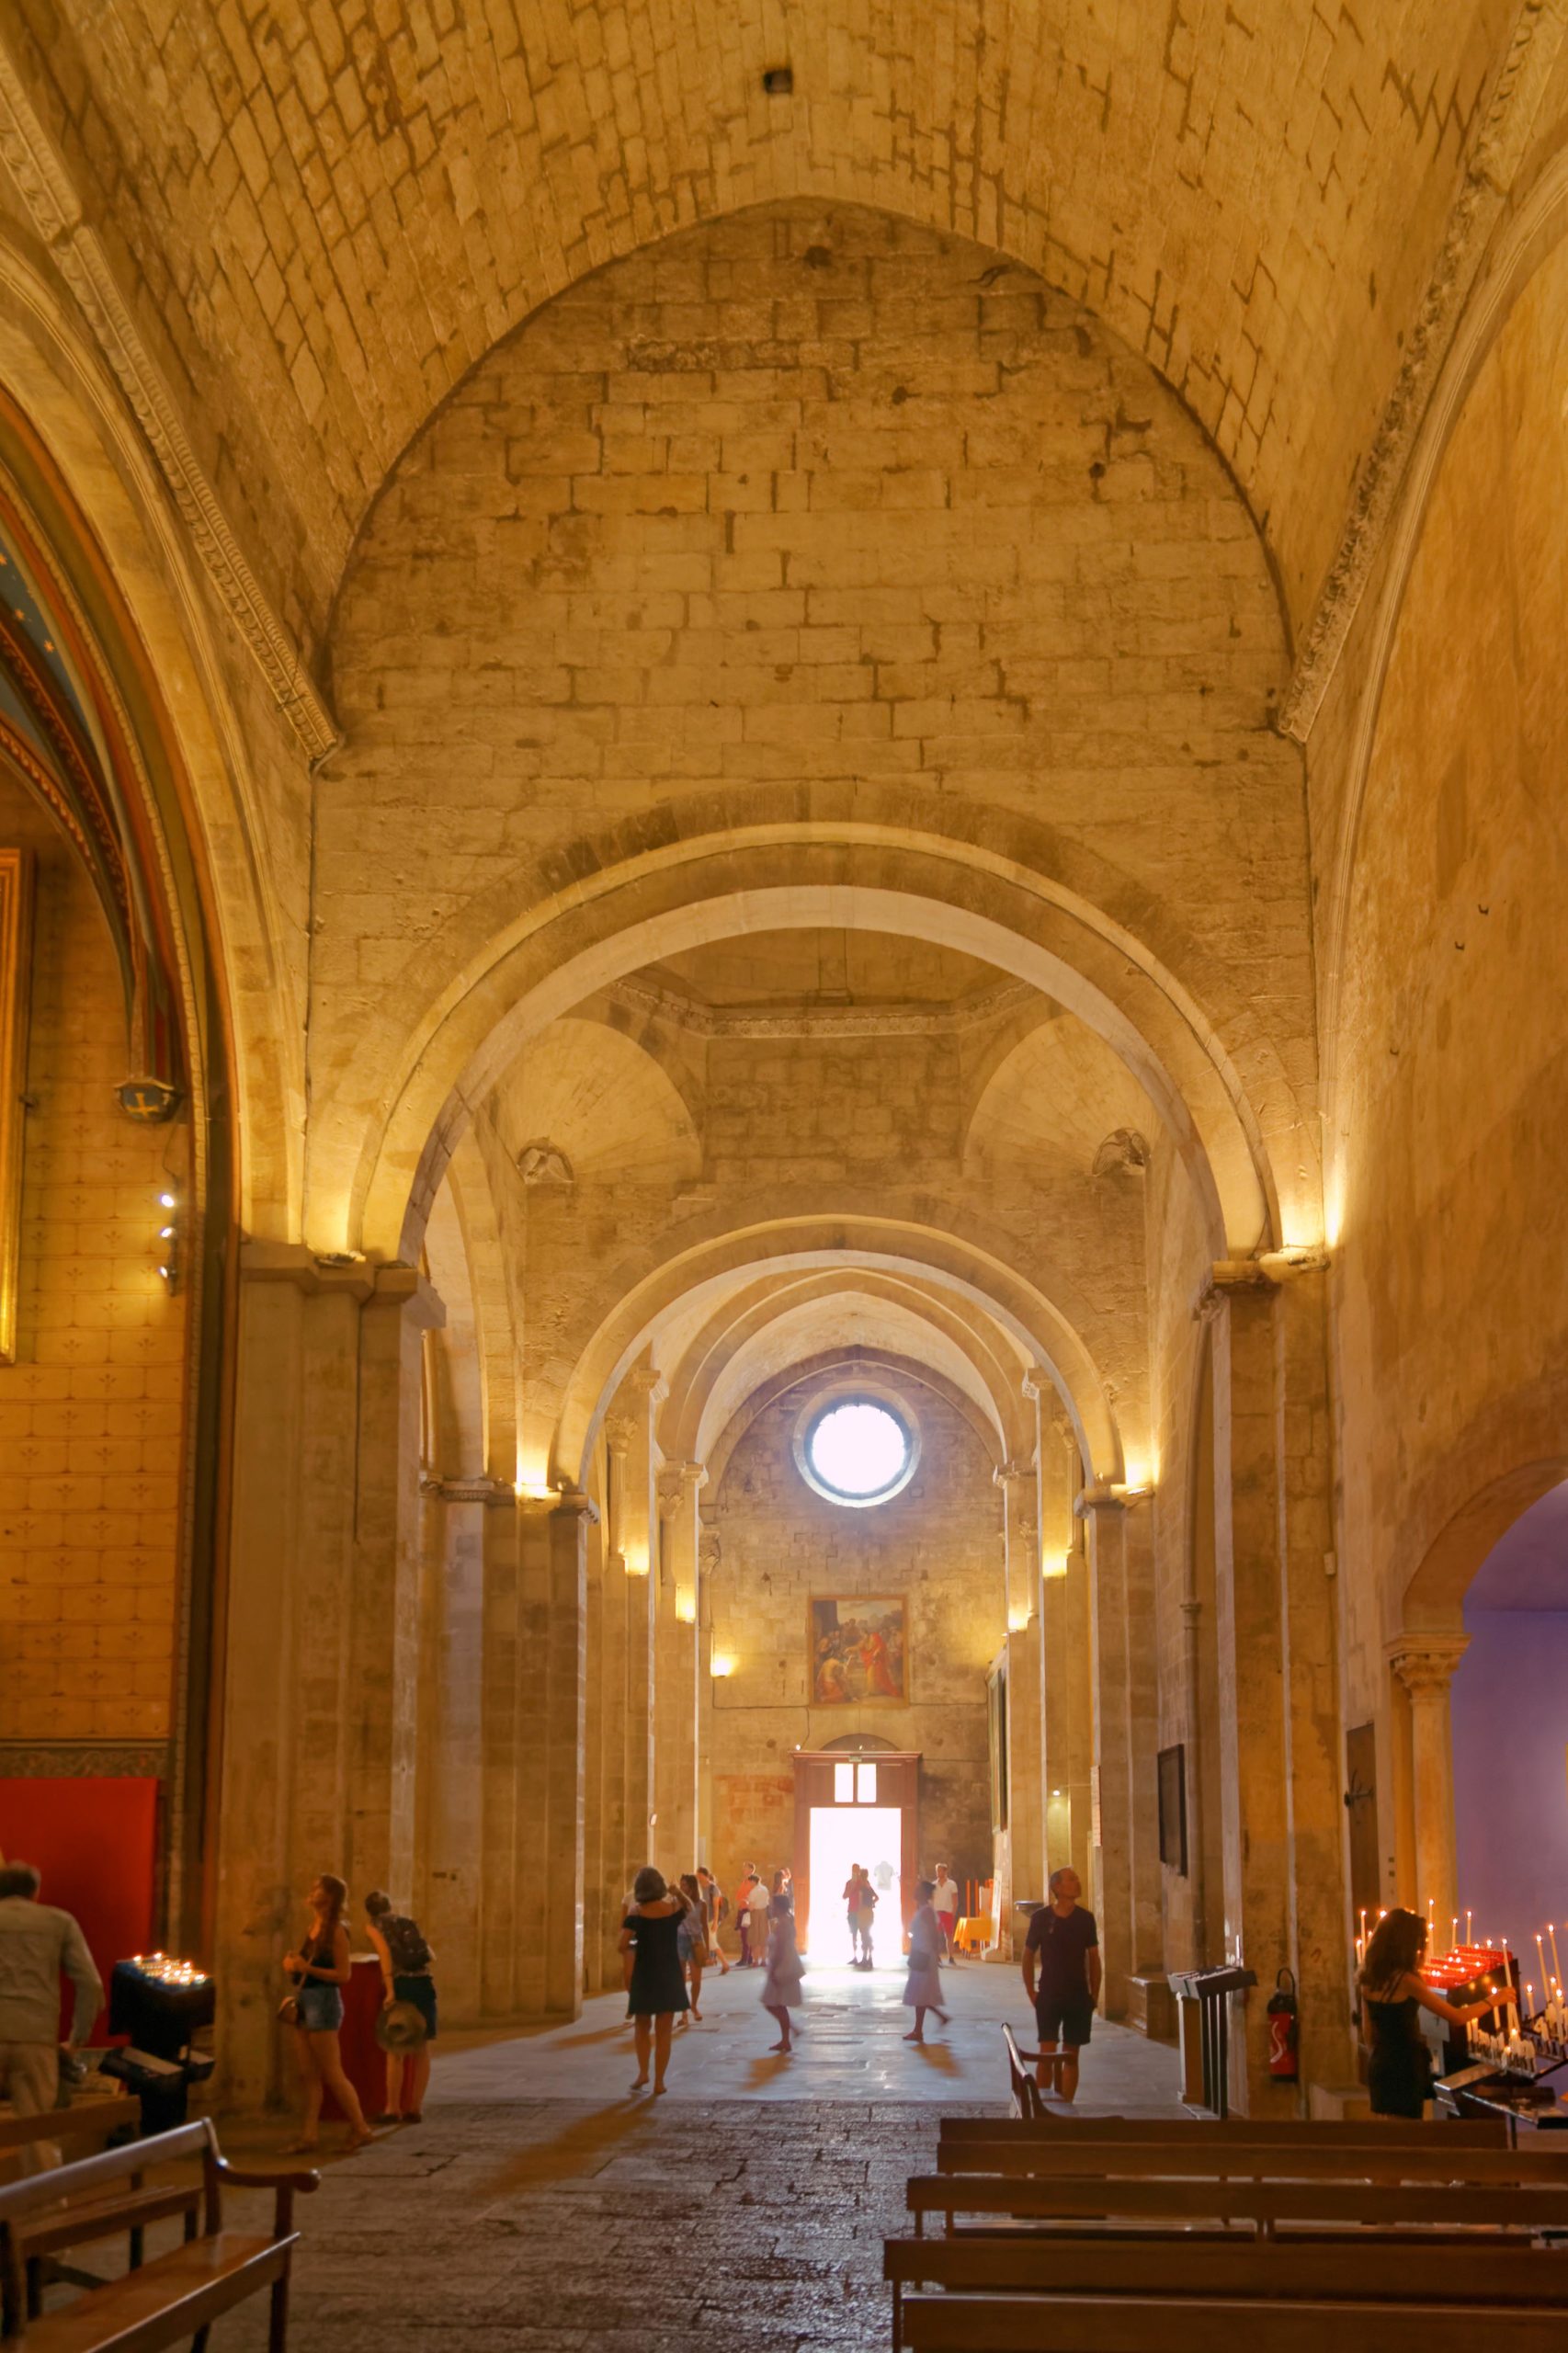 The Romanesque nave of Aix-en-Provence Cathedral © Bjs - licence [CC BY-SA 4.0] from Wikimedia Commons